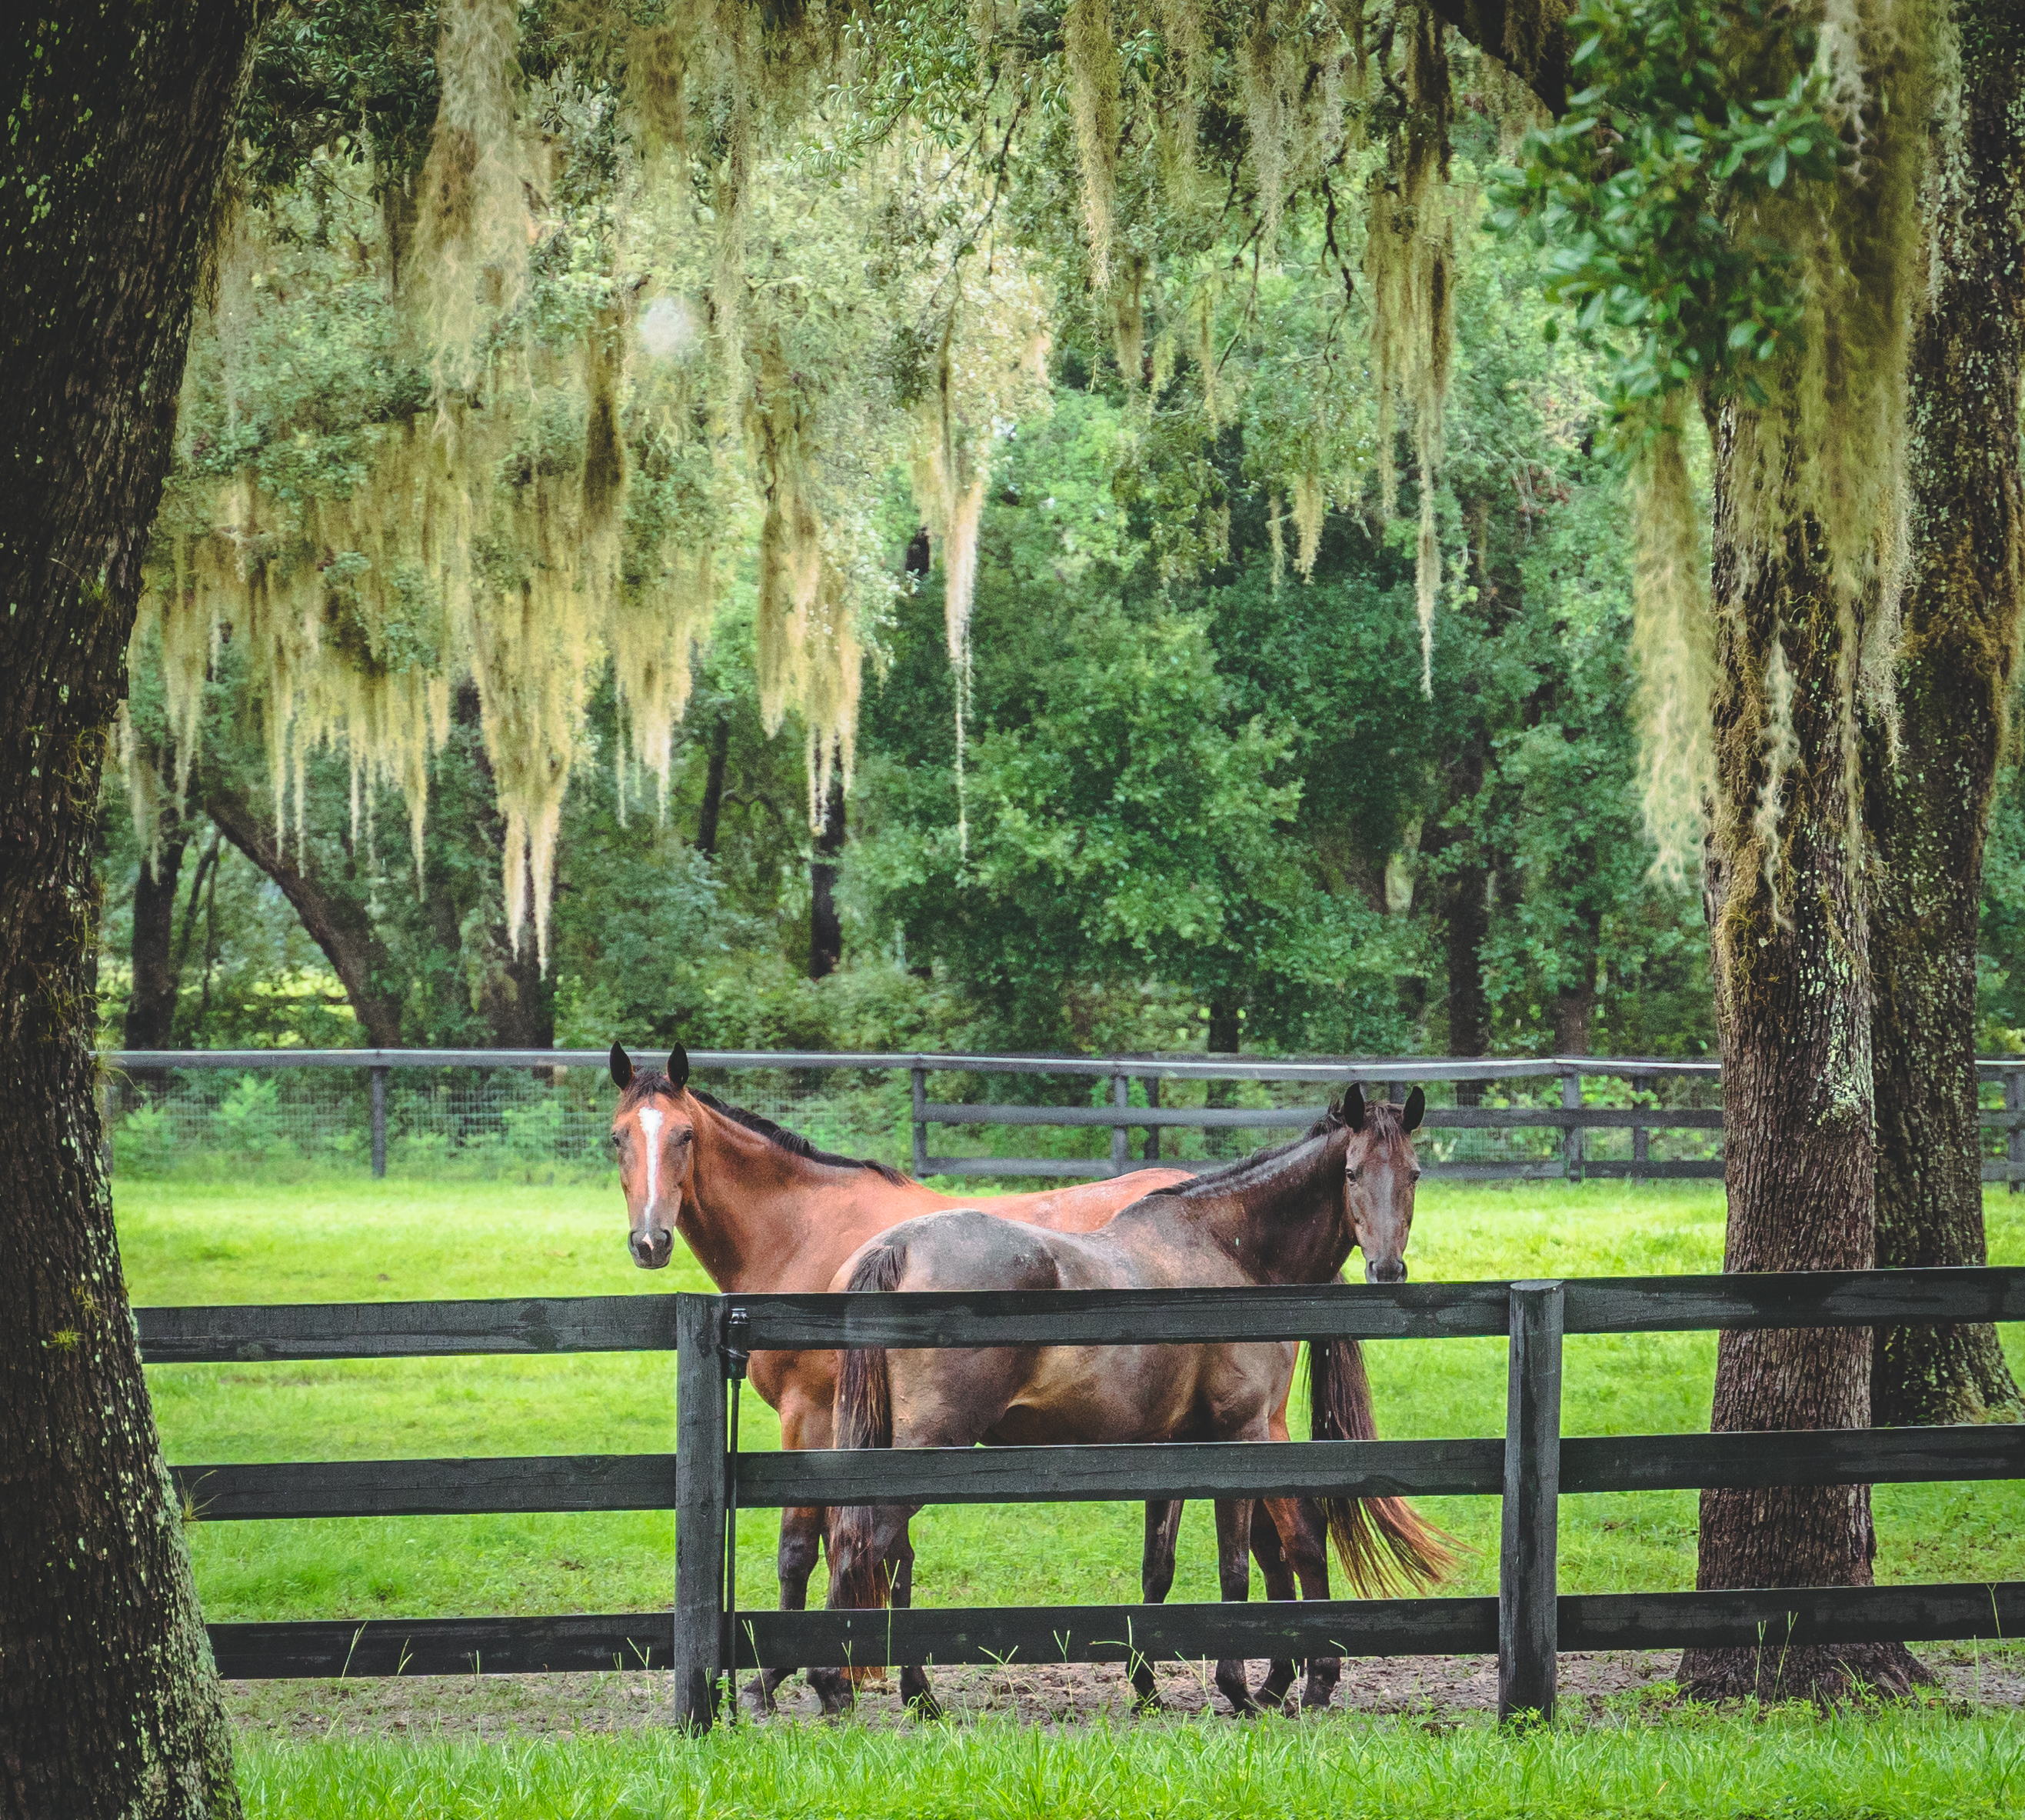 Paddock with two horses standing under trees with Spanish moss